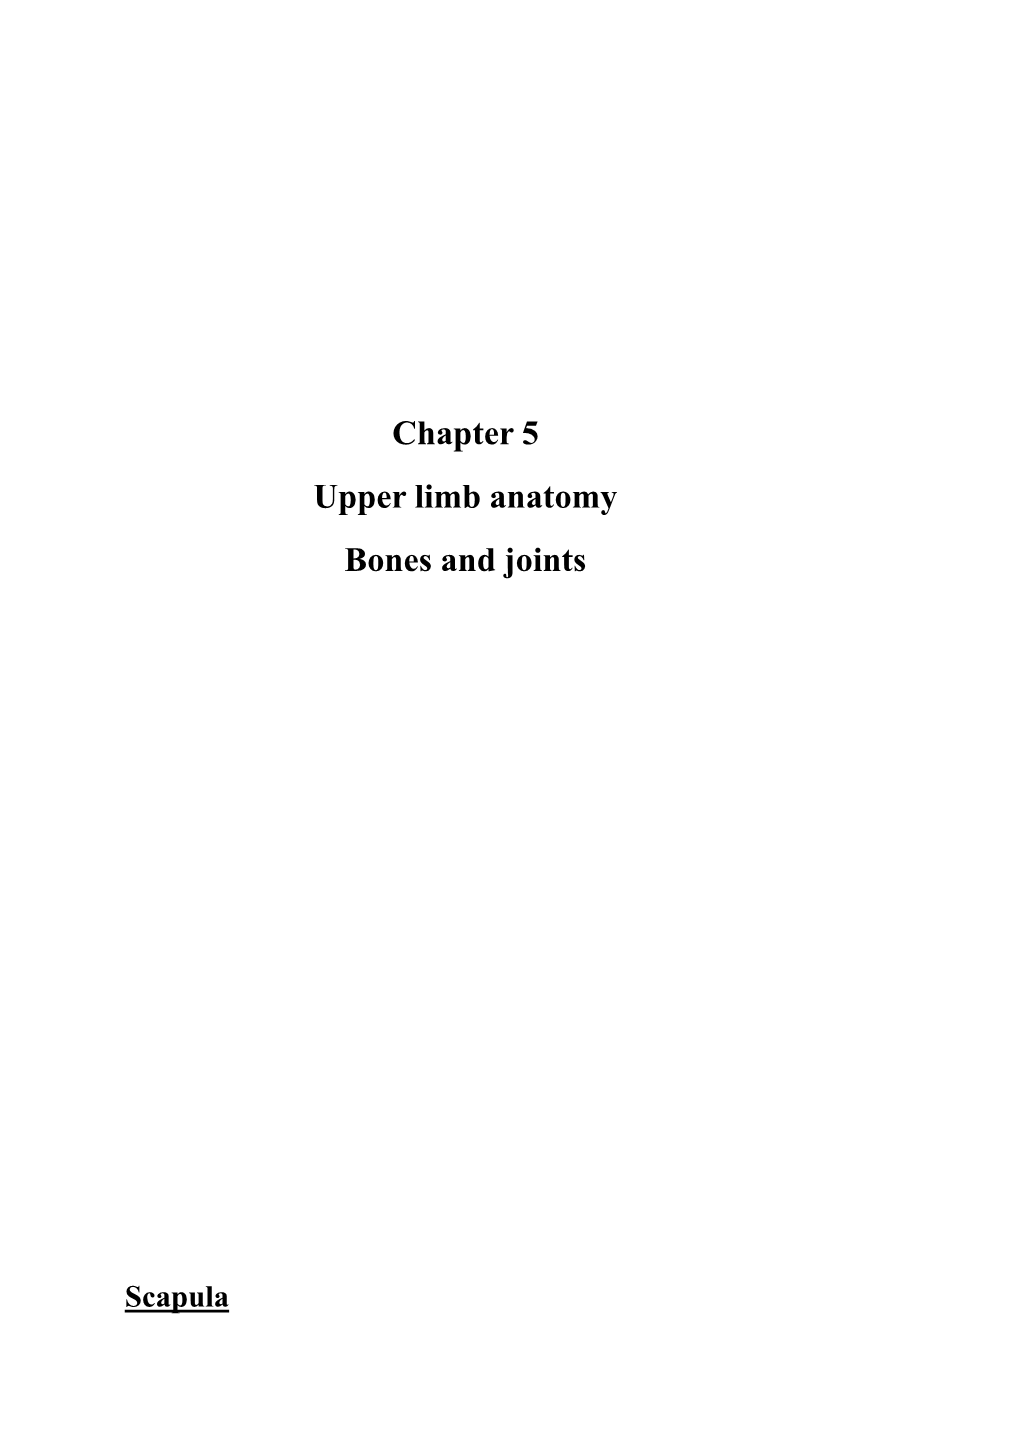 Chapter 5 Upper Limb Anatomy Bones and Joints